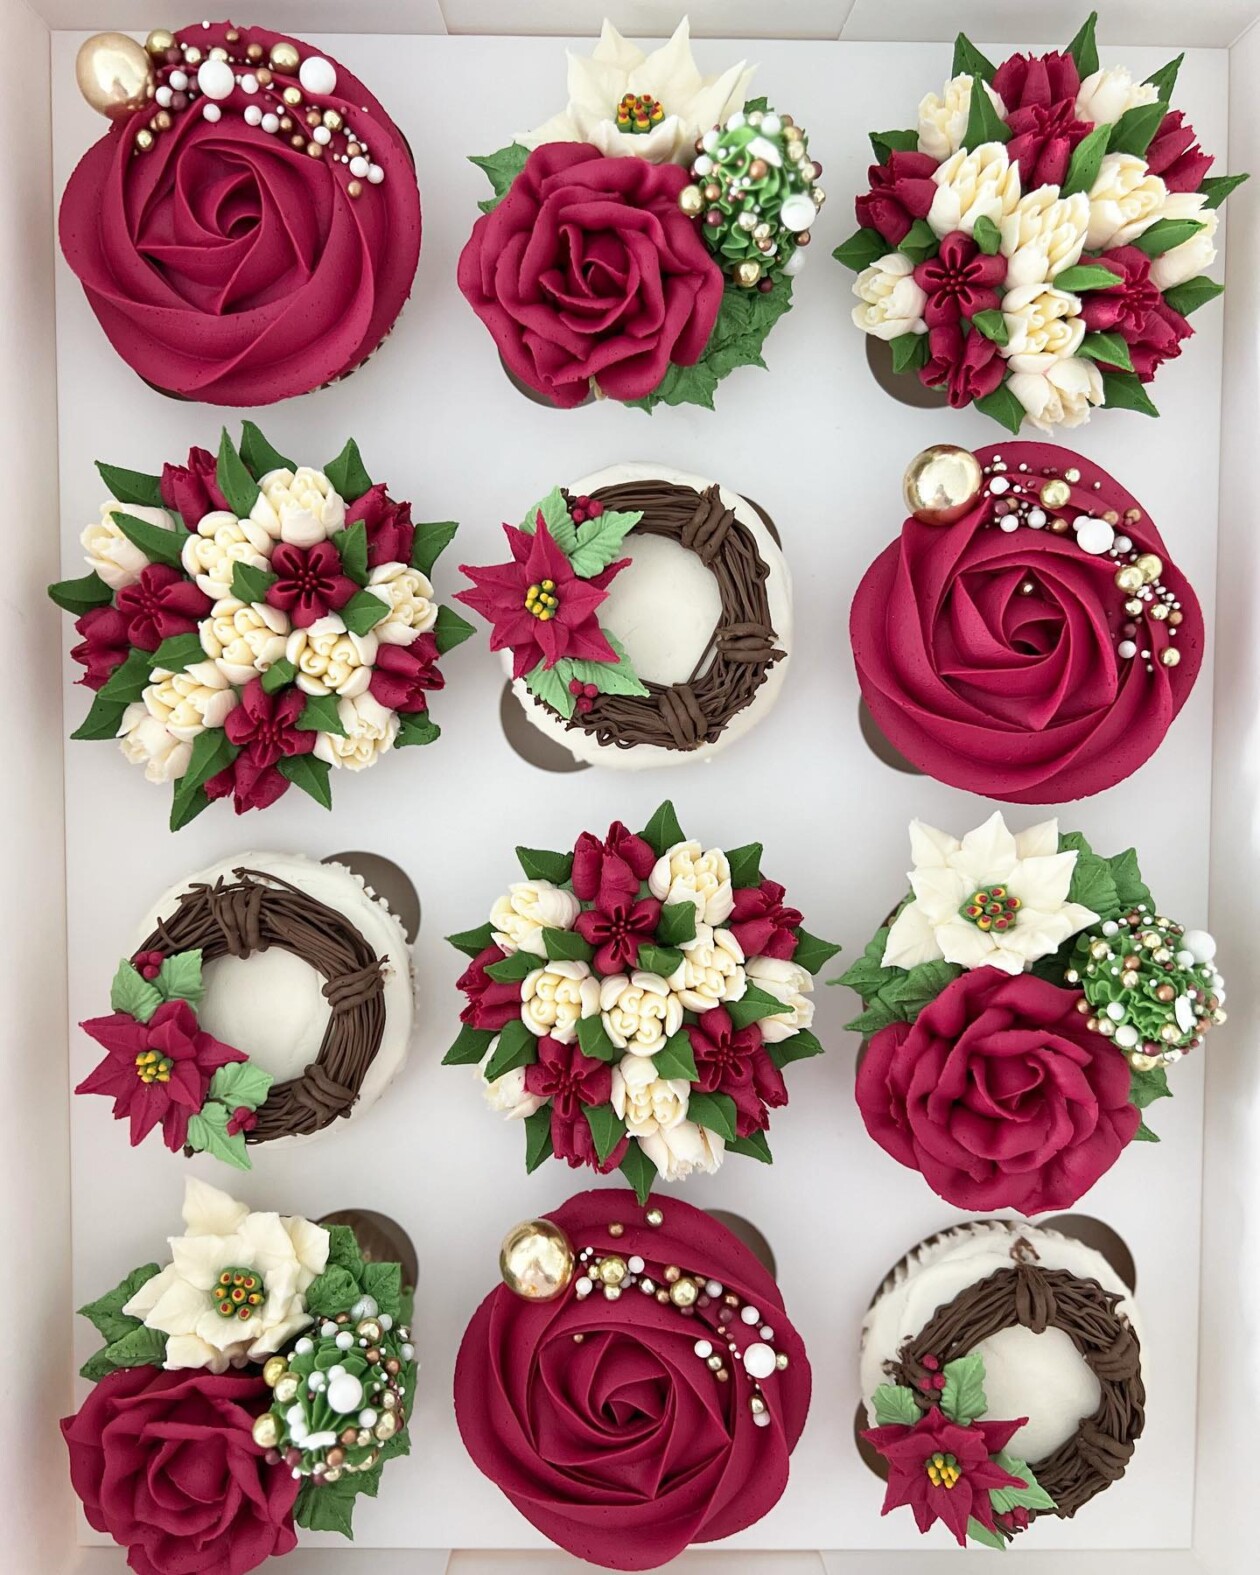 Gorgeous Cupcakes Decorated With Buttercream Flowers And Succulents By Kerry's Bouqcakes (12)